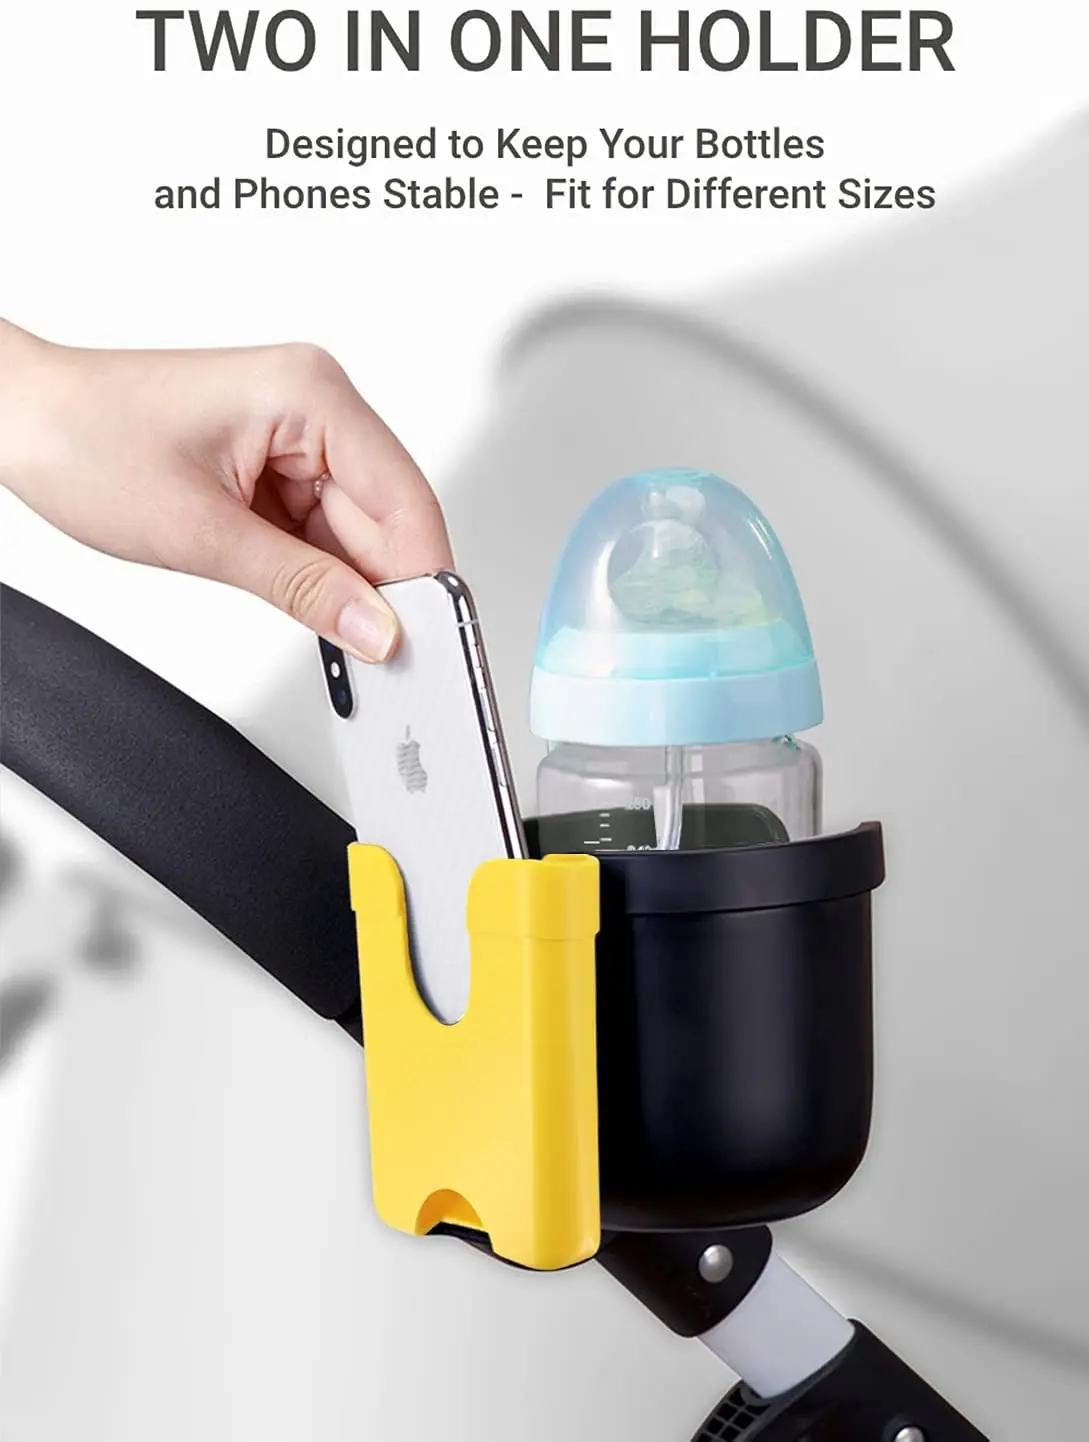 baby stroller cover for winter 2-in-1 Stroller Cup Holder with Phone Holder Universal Cup Holder for Strollers Baby Stroller Accessories for Buggy Pushchair baby stroller cover for rain